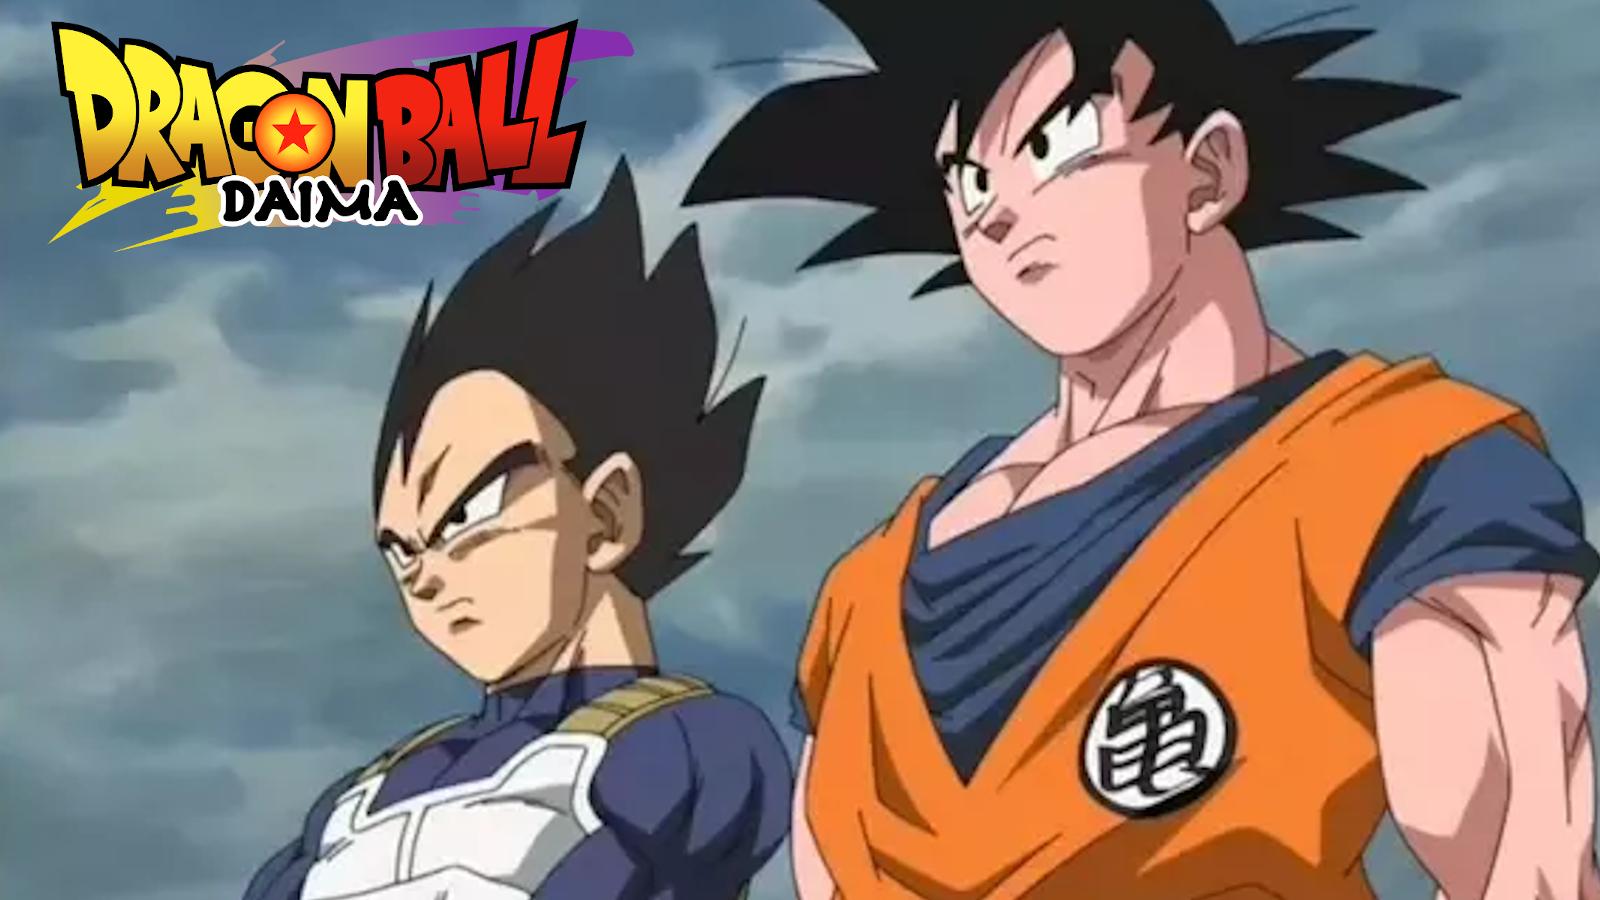 Dragon Ball Daima episode one anime details leak ahead of 2024 release ...